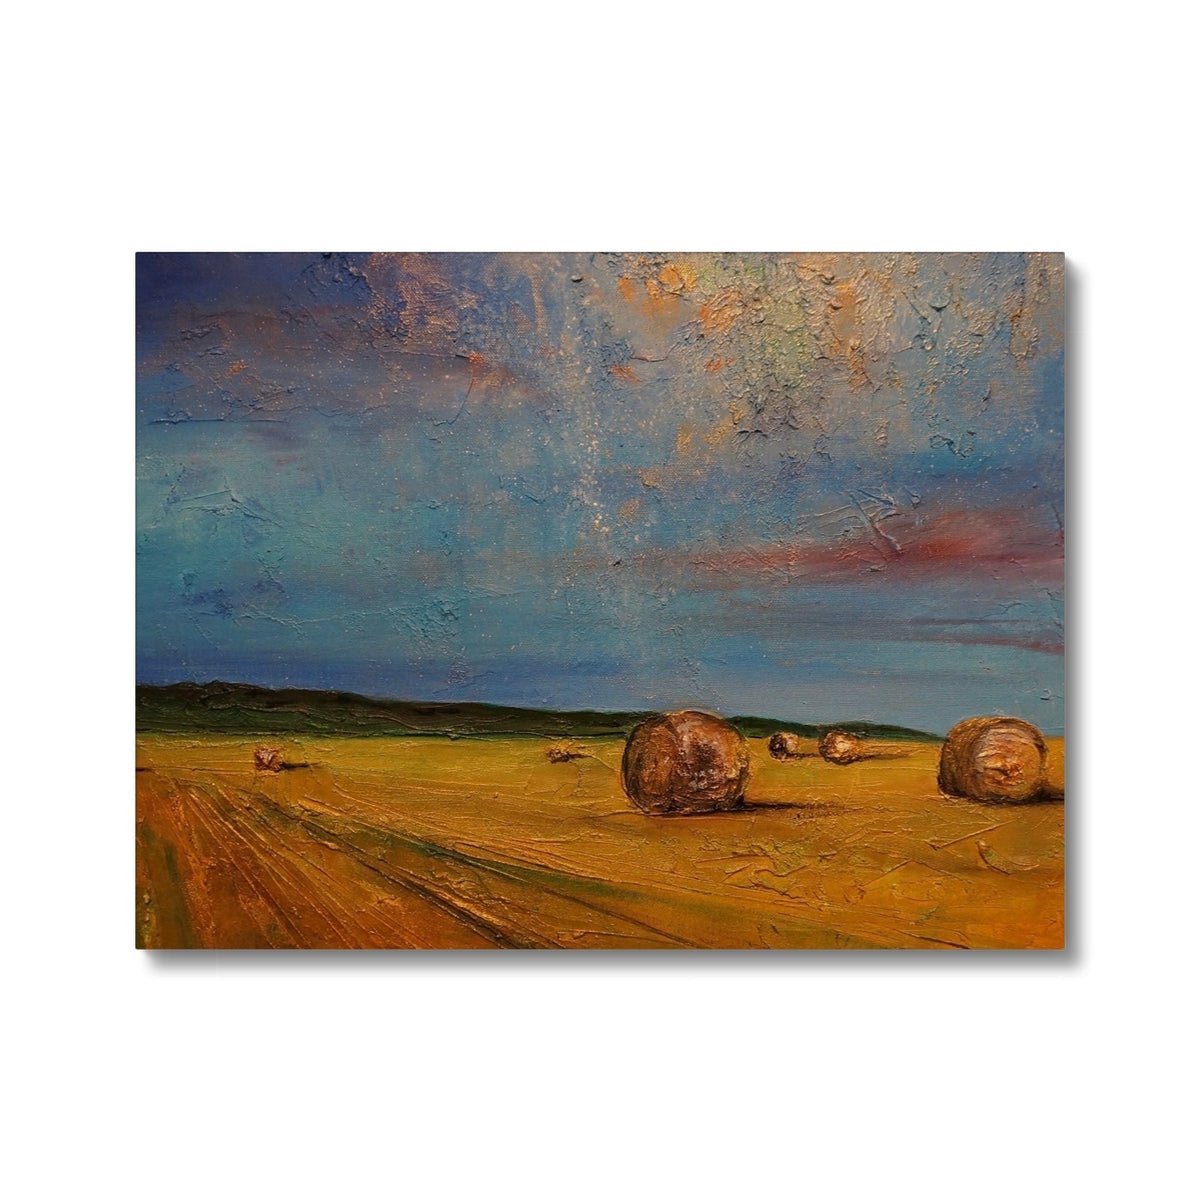 Hay Bales Painting | Canvas From Scotland-Contemporary Stretched Canvas Prints-Scottish Highlands & Lowlands Art Gallery-24"x18"-Paintings, Prints, Homeware, Art Gifts From Scotland By Scottish Artist Kevin Hunter